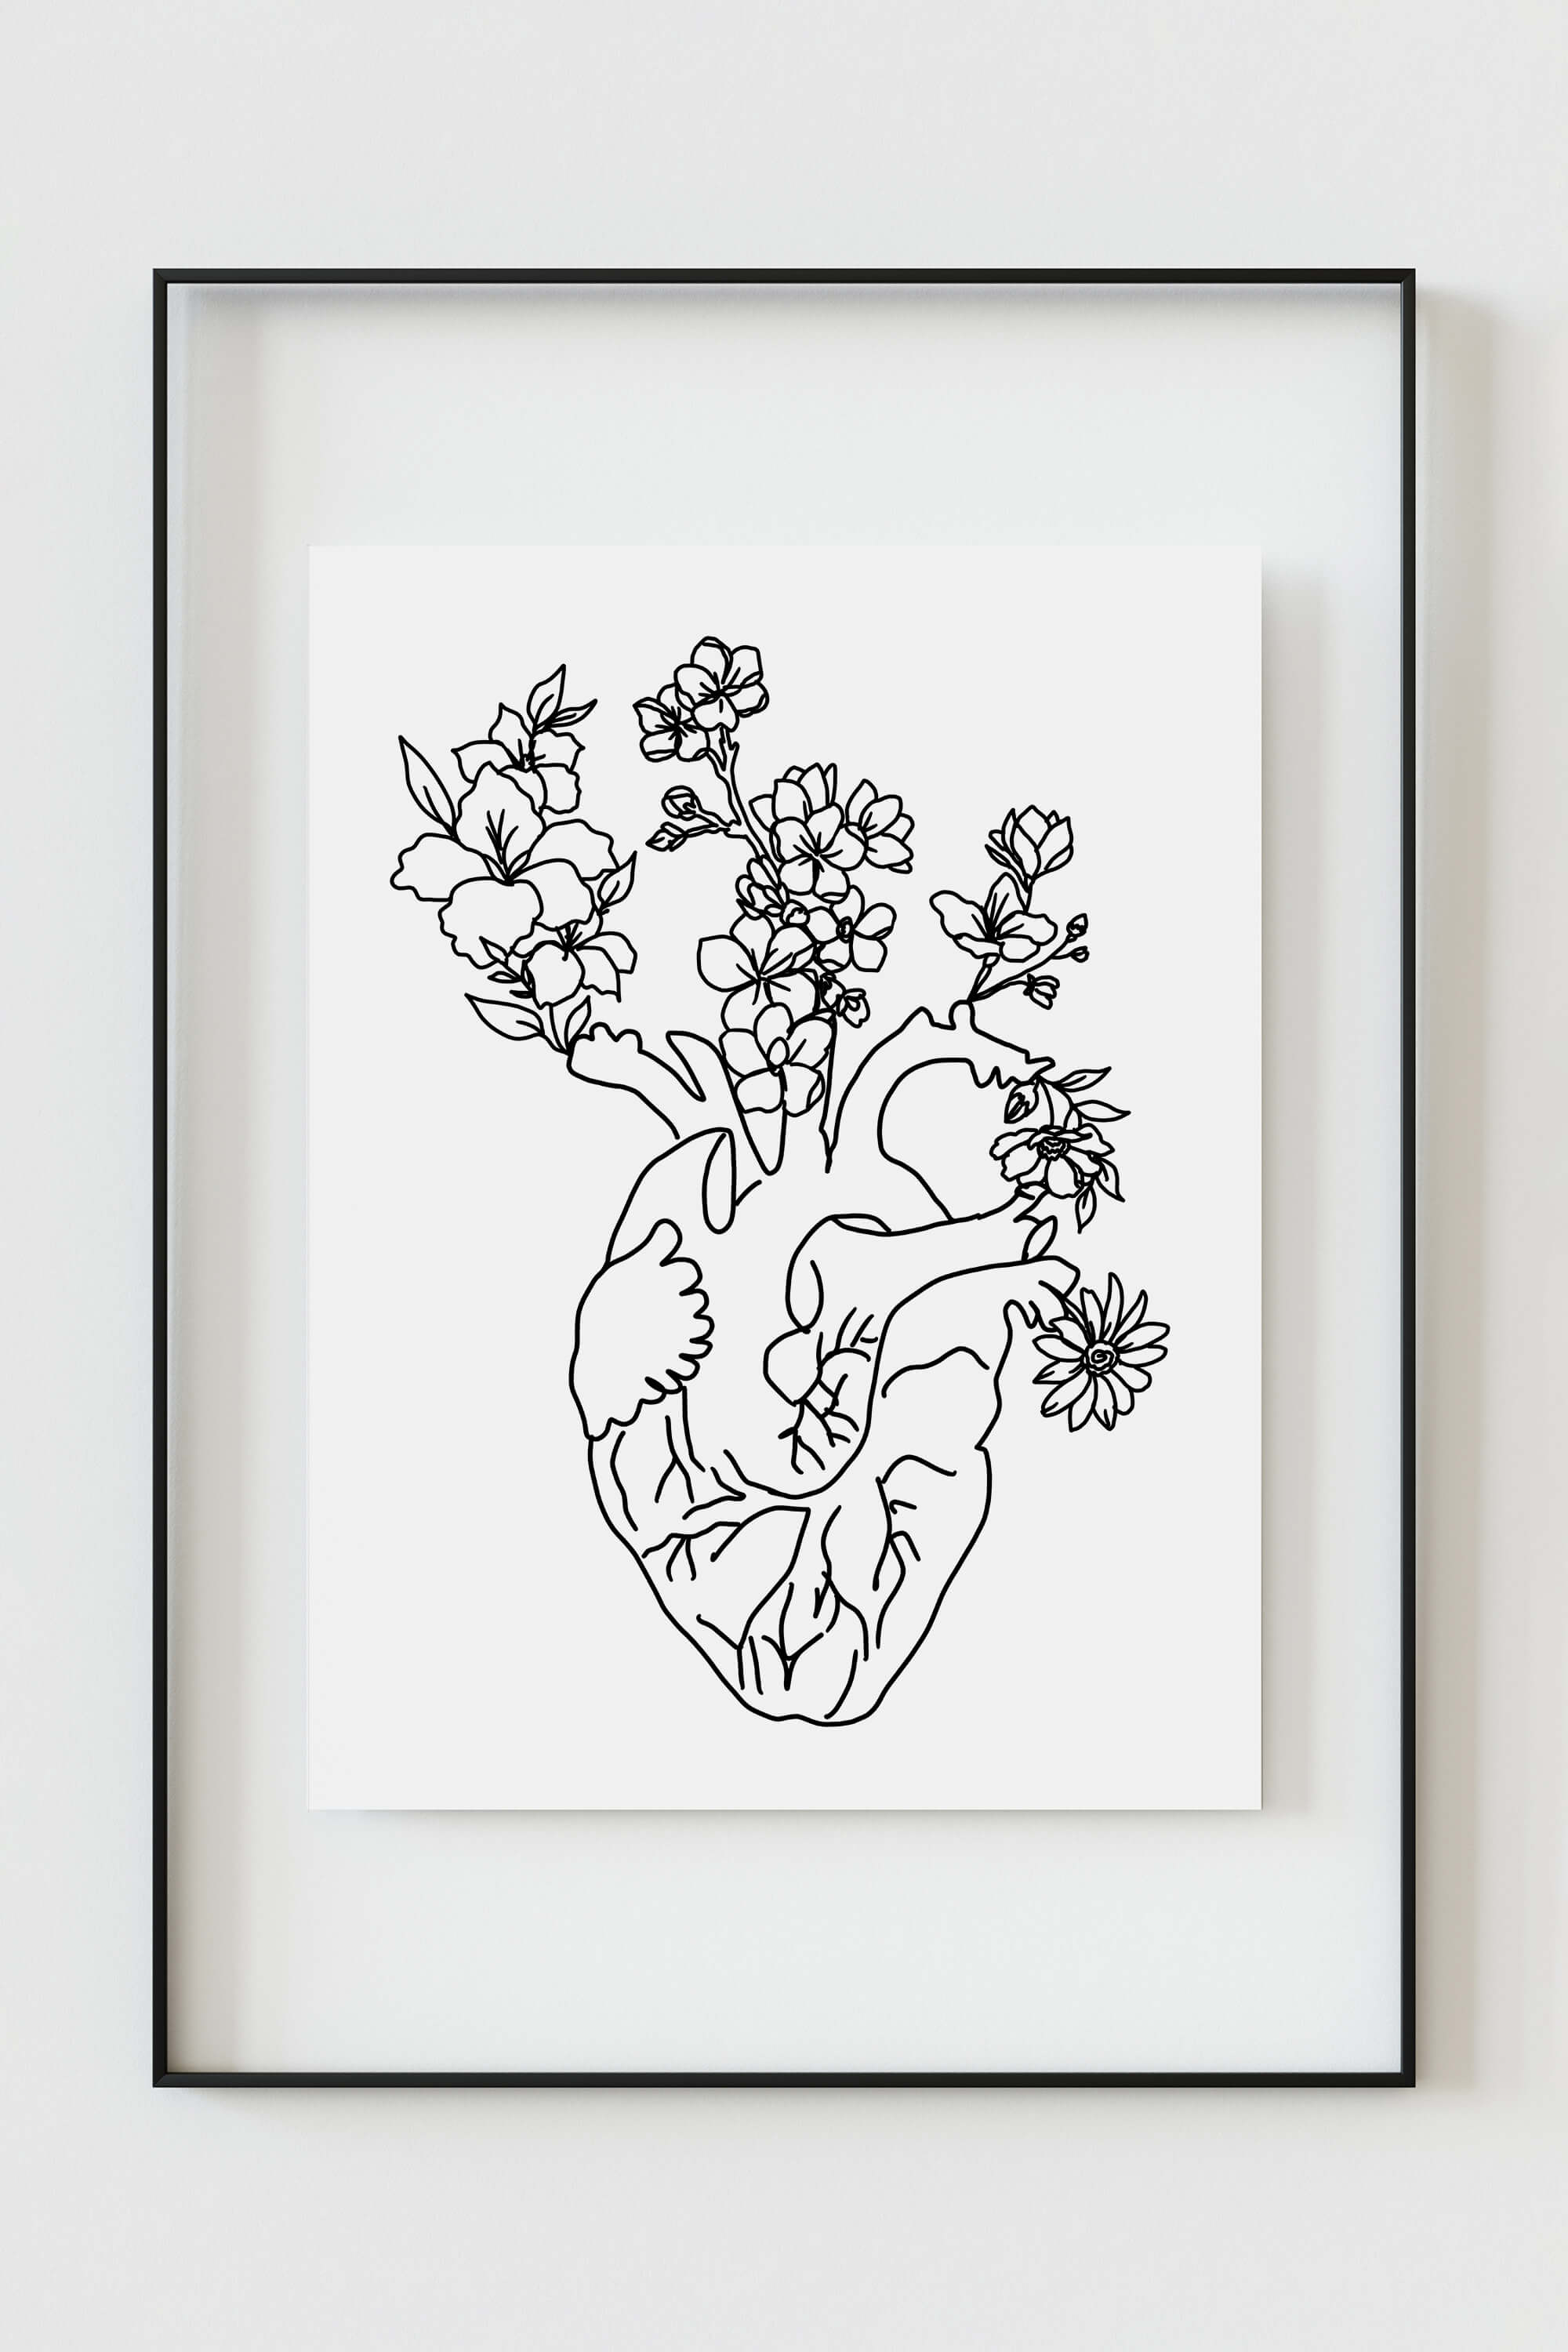 Retirement Gift for Nurse - Thoughtful black and white anatomical art for retirement celebration.